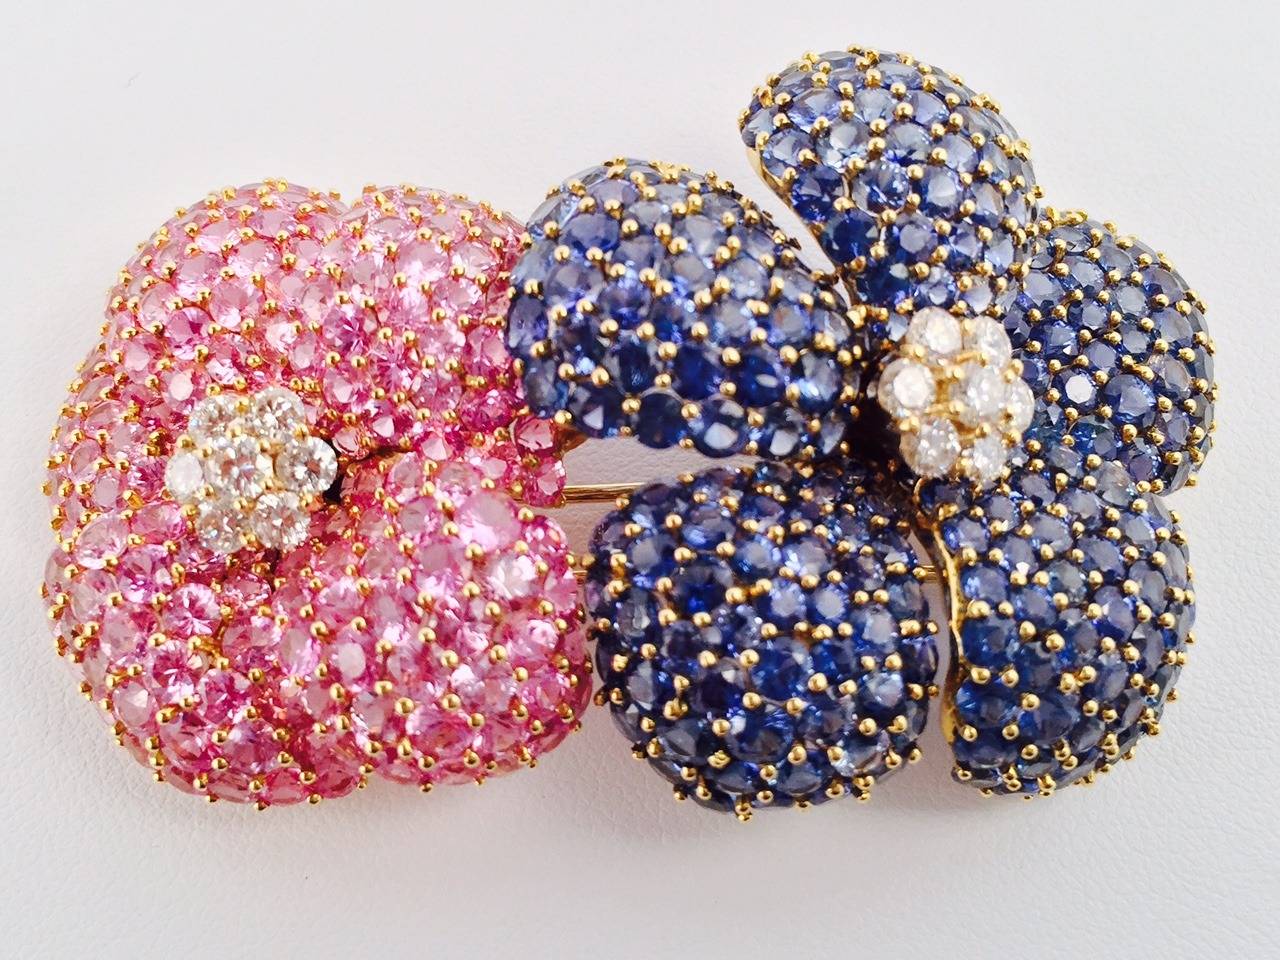 Set in 18K Yellow Gold, Pink and Blue Sapphire Double Flower Brooch features exquisite white diamond detail!  Pink Sapphires: Approximately 16.82 ct tw.  Blue Sapphires:  Approximately 26.24 ct tw.  White Diamonds:  Approximately 1.40 ct tw.  Stone